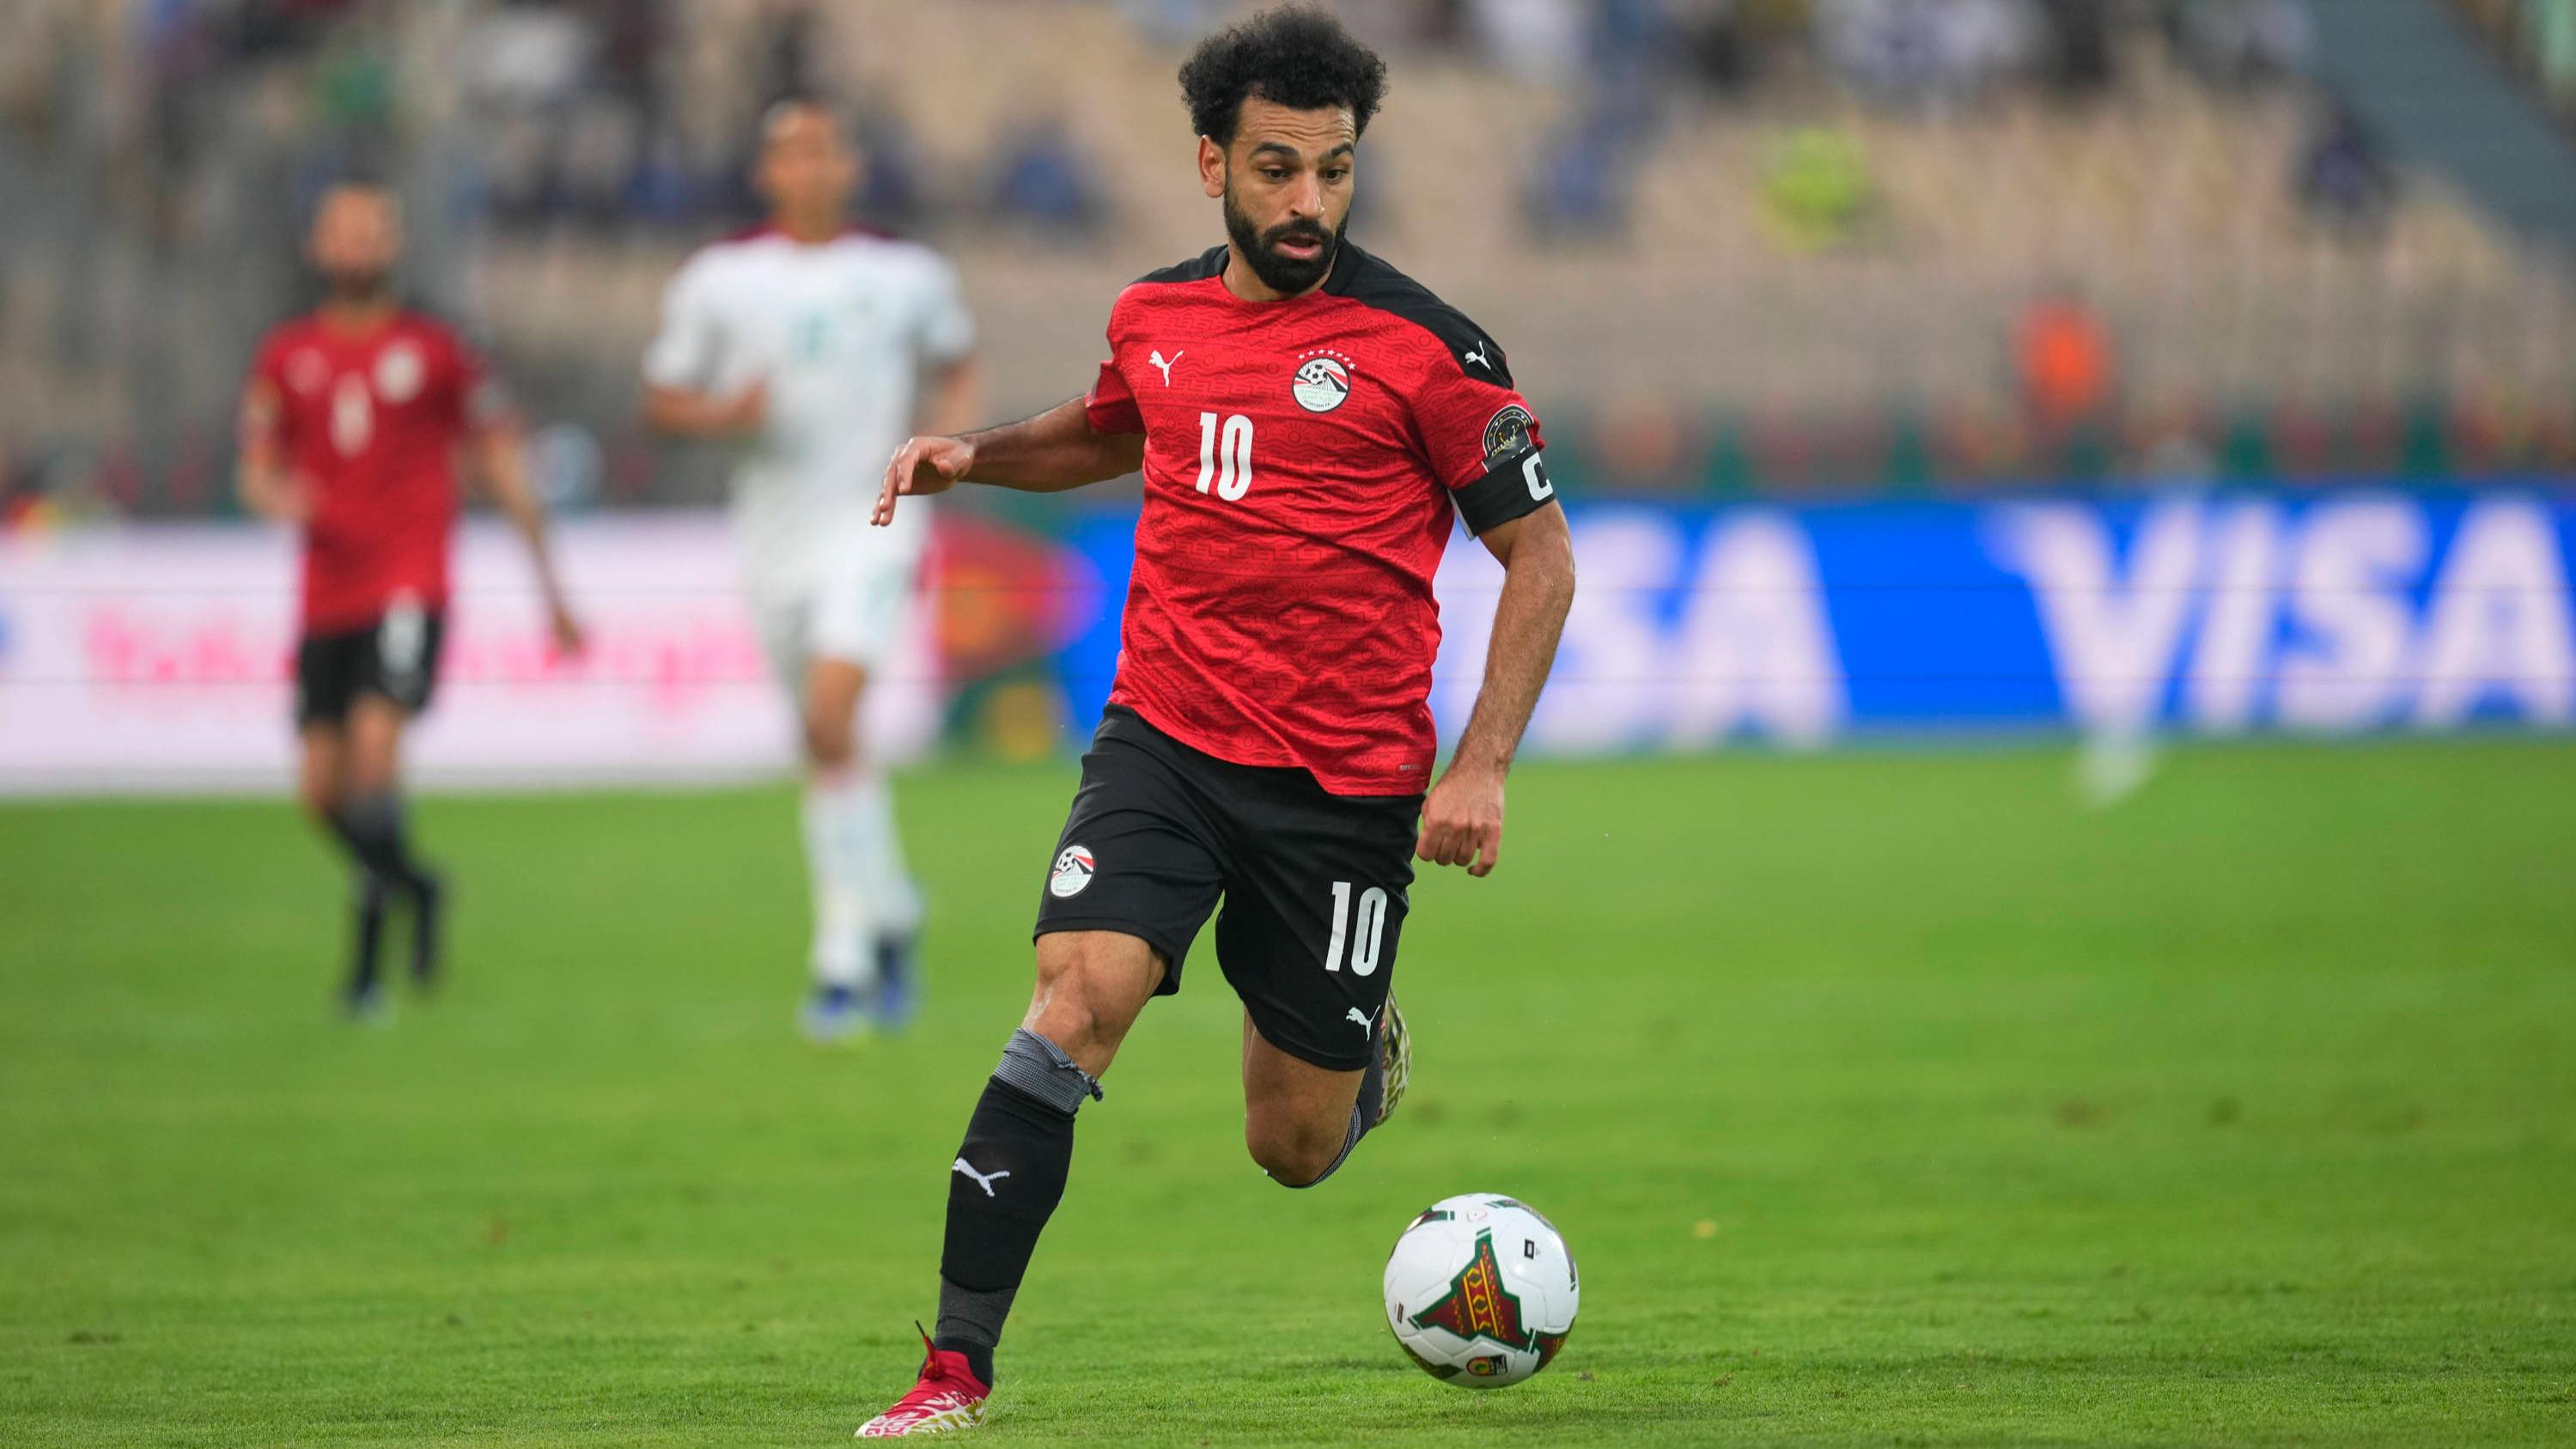 Paris 2024 Olympic Games: Mohamed Salah at the Games? “He will be there,” confirms the president of the Egyptian federation